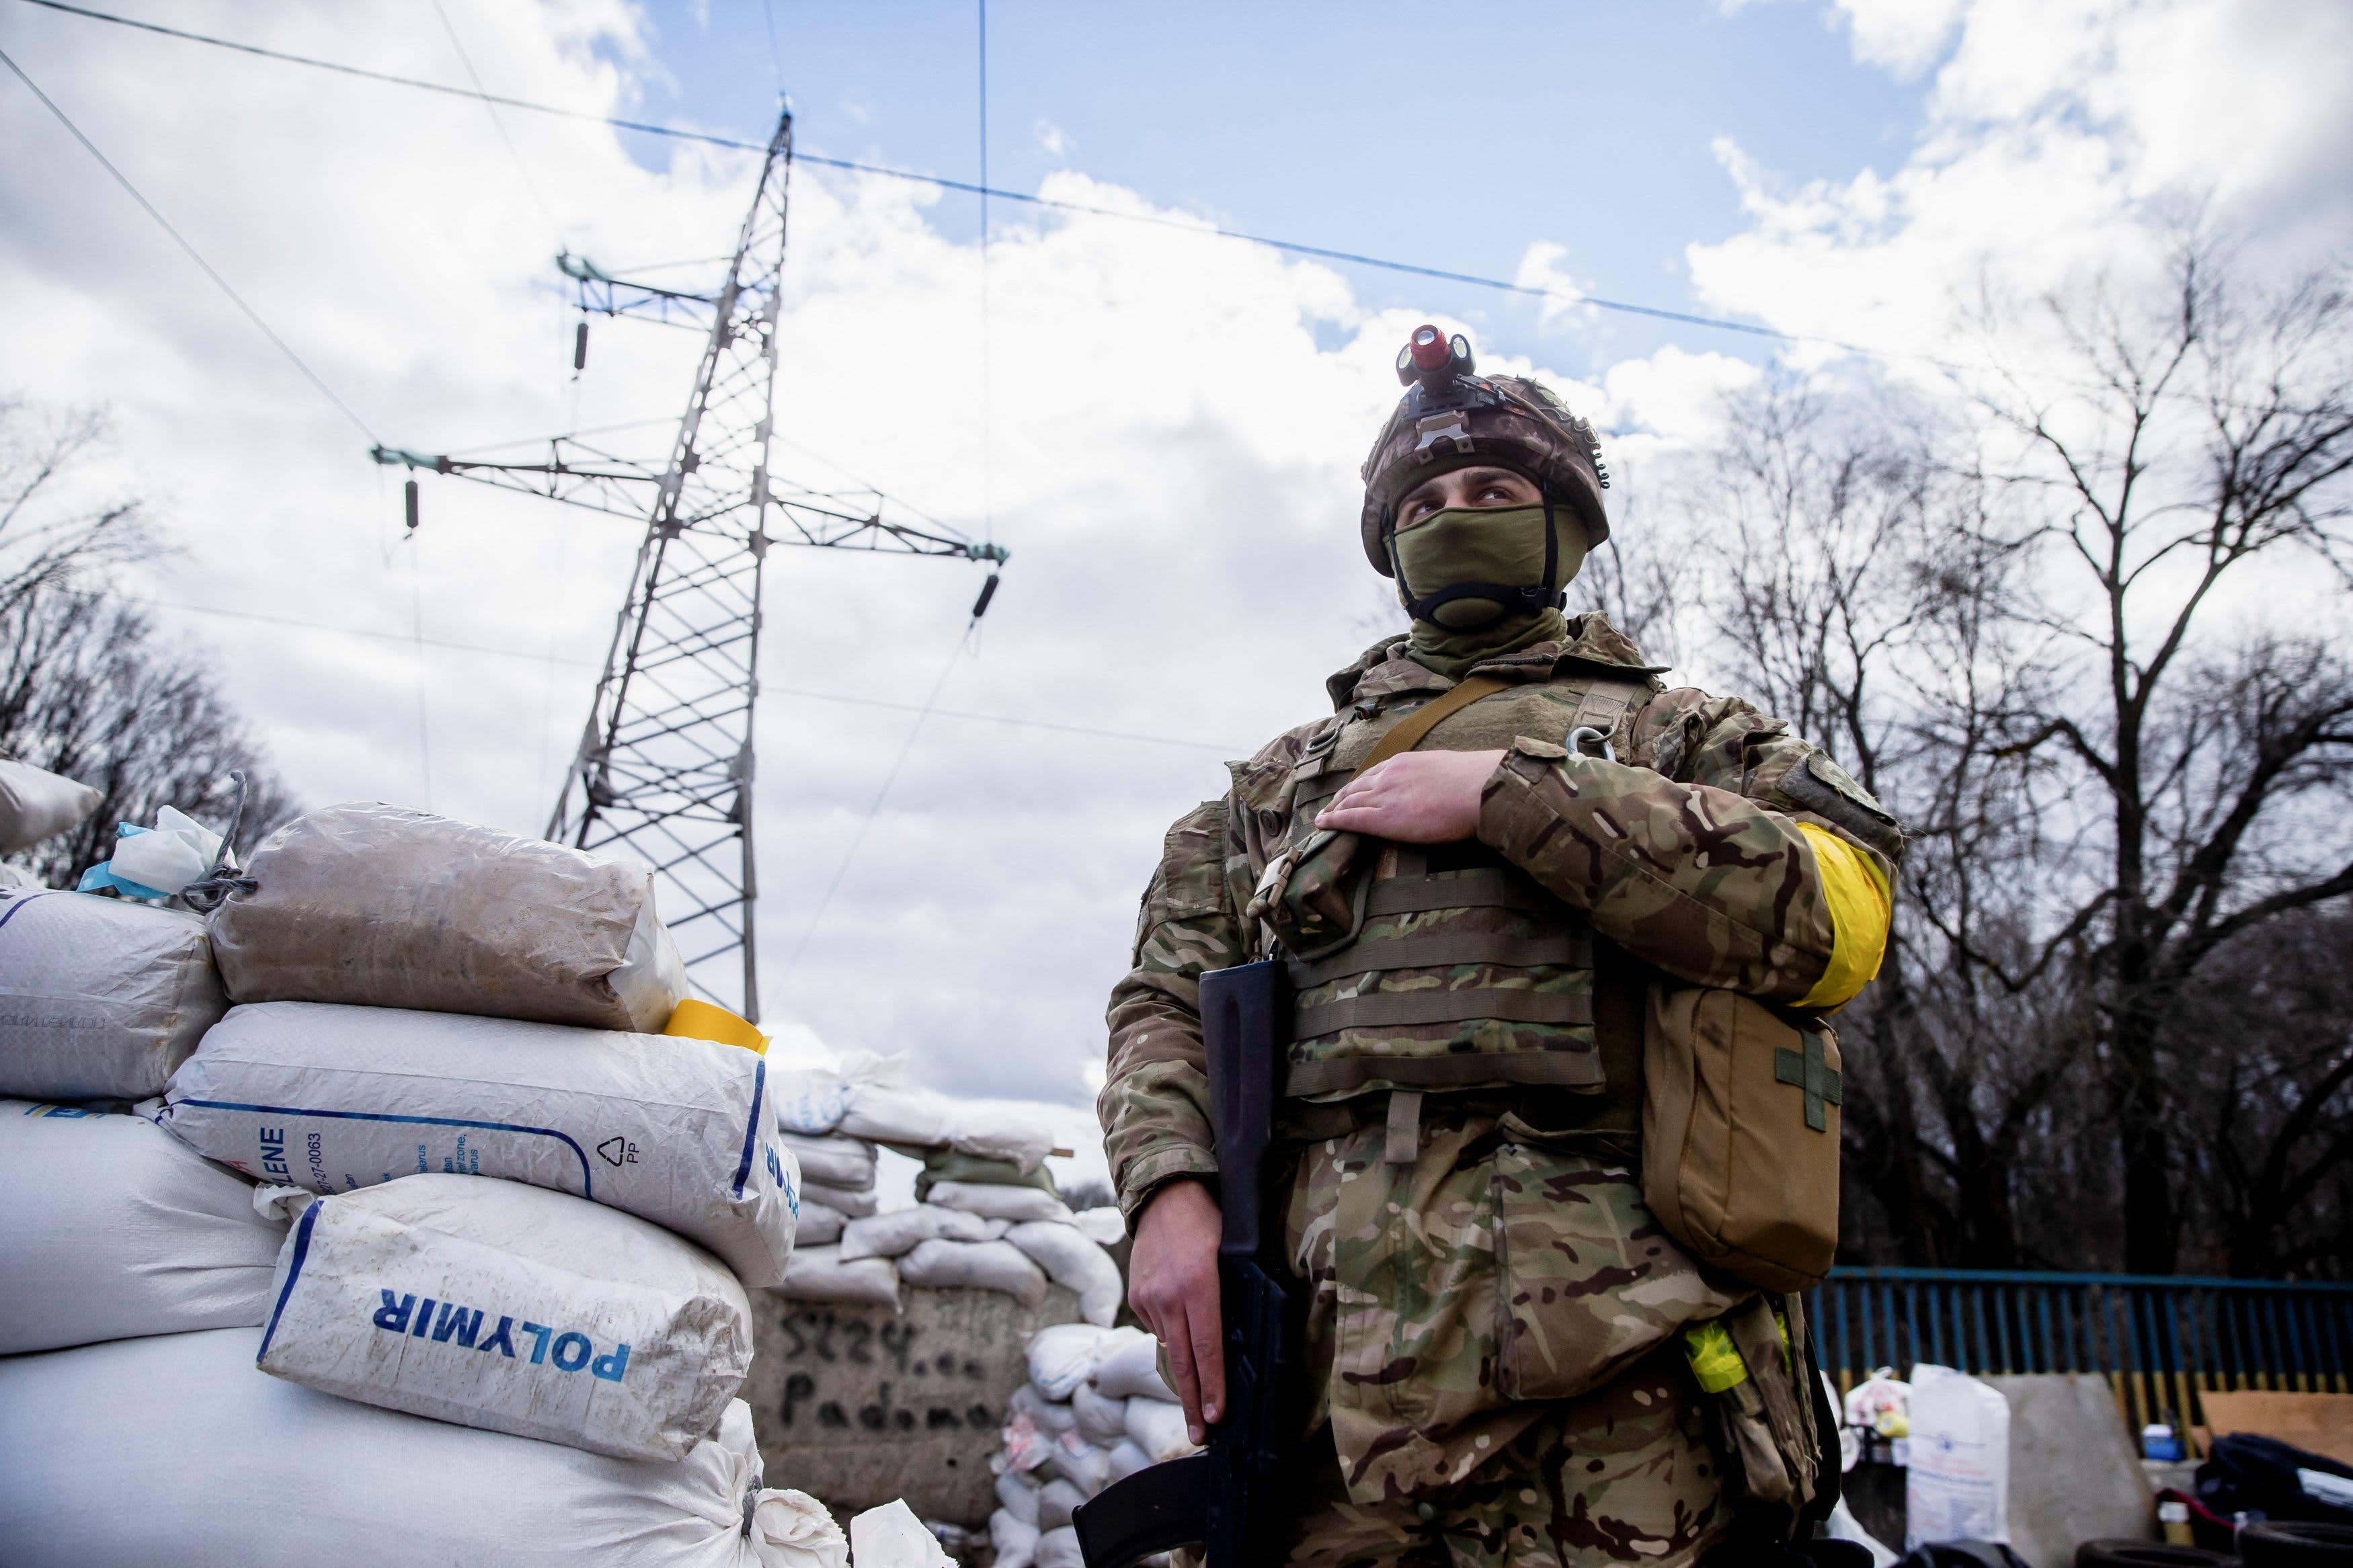 Next 24 hours are ‘crucial’ for Ukraine as its resistance prepares for renewed pressure